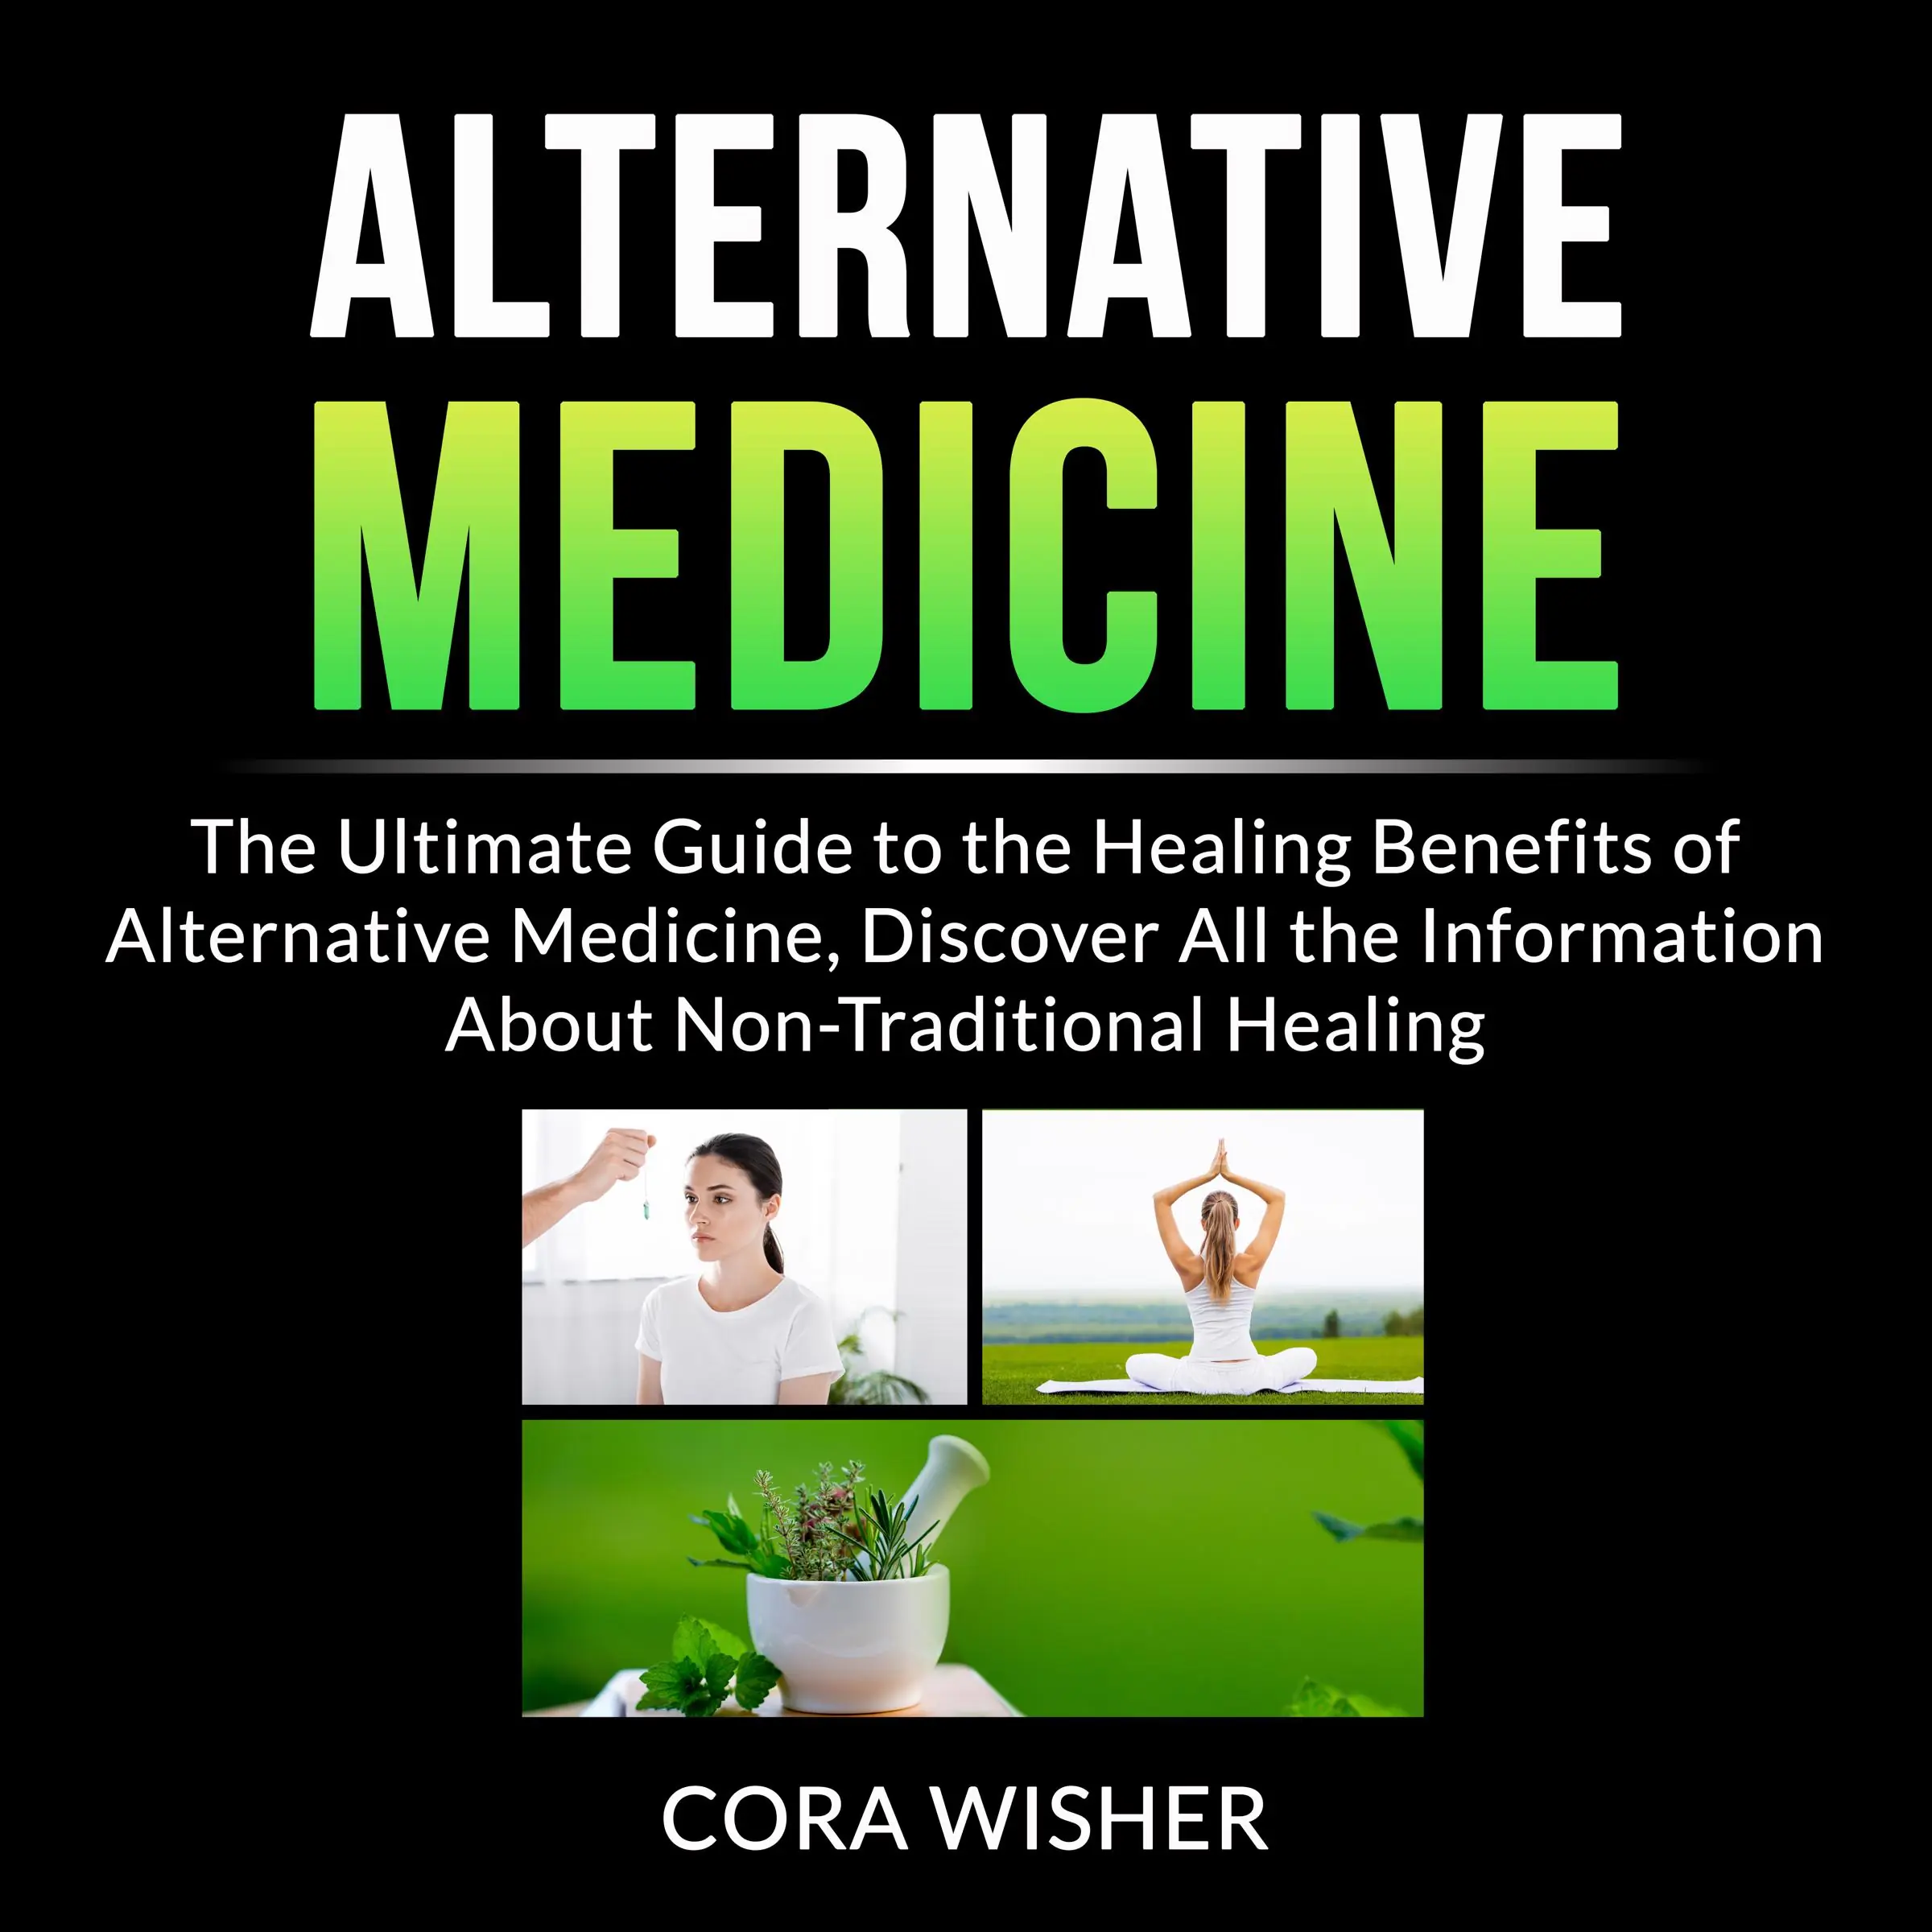 Alternative Medicine: The Ultimate Guide to the Healing Benefits of Alternative Medicine, Discover All the Information About Non-Traditional Healing Audiobook by Cora Wisher